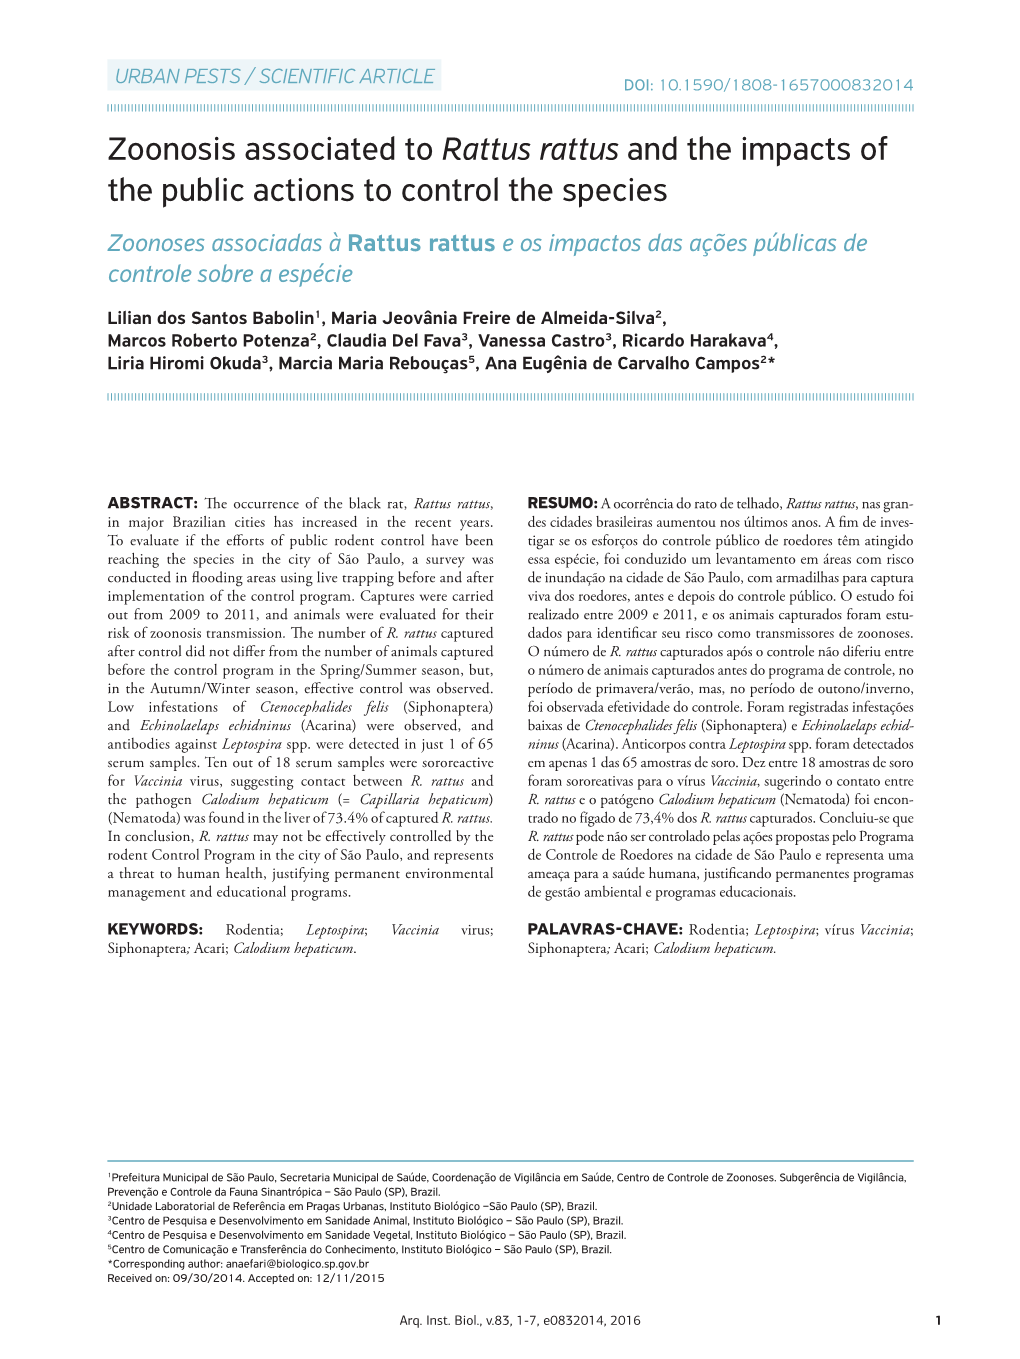 Zoonosis Associated to Rattus Rattus and the Impacts of the Public